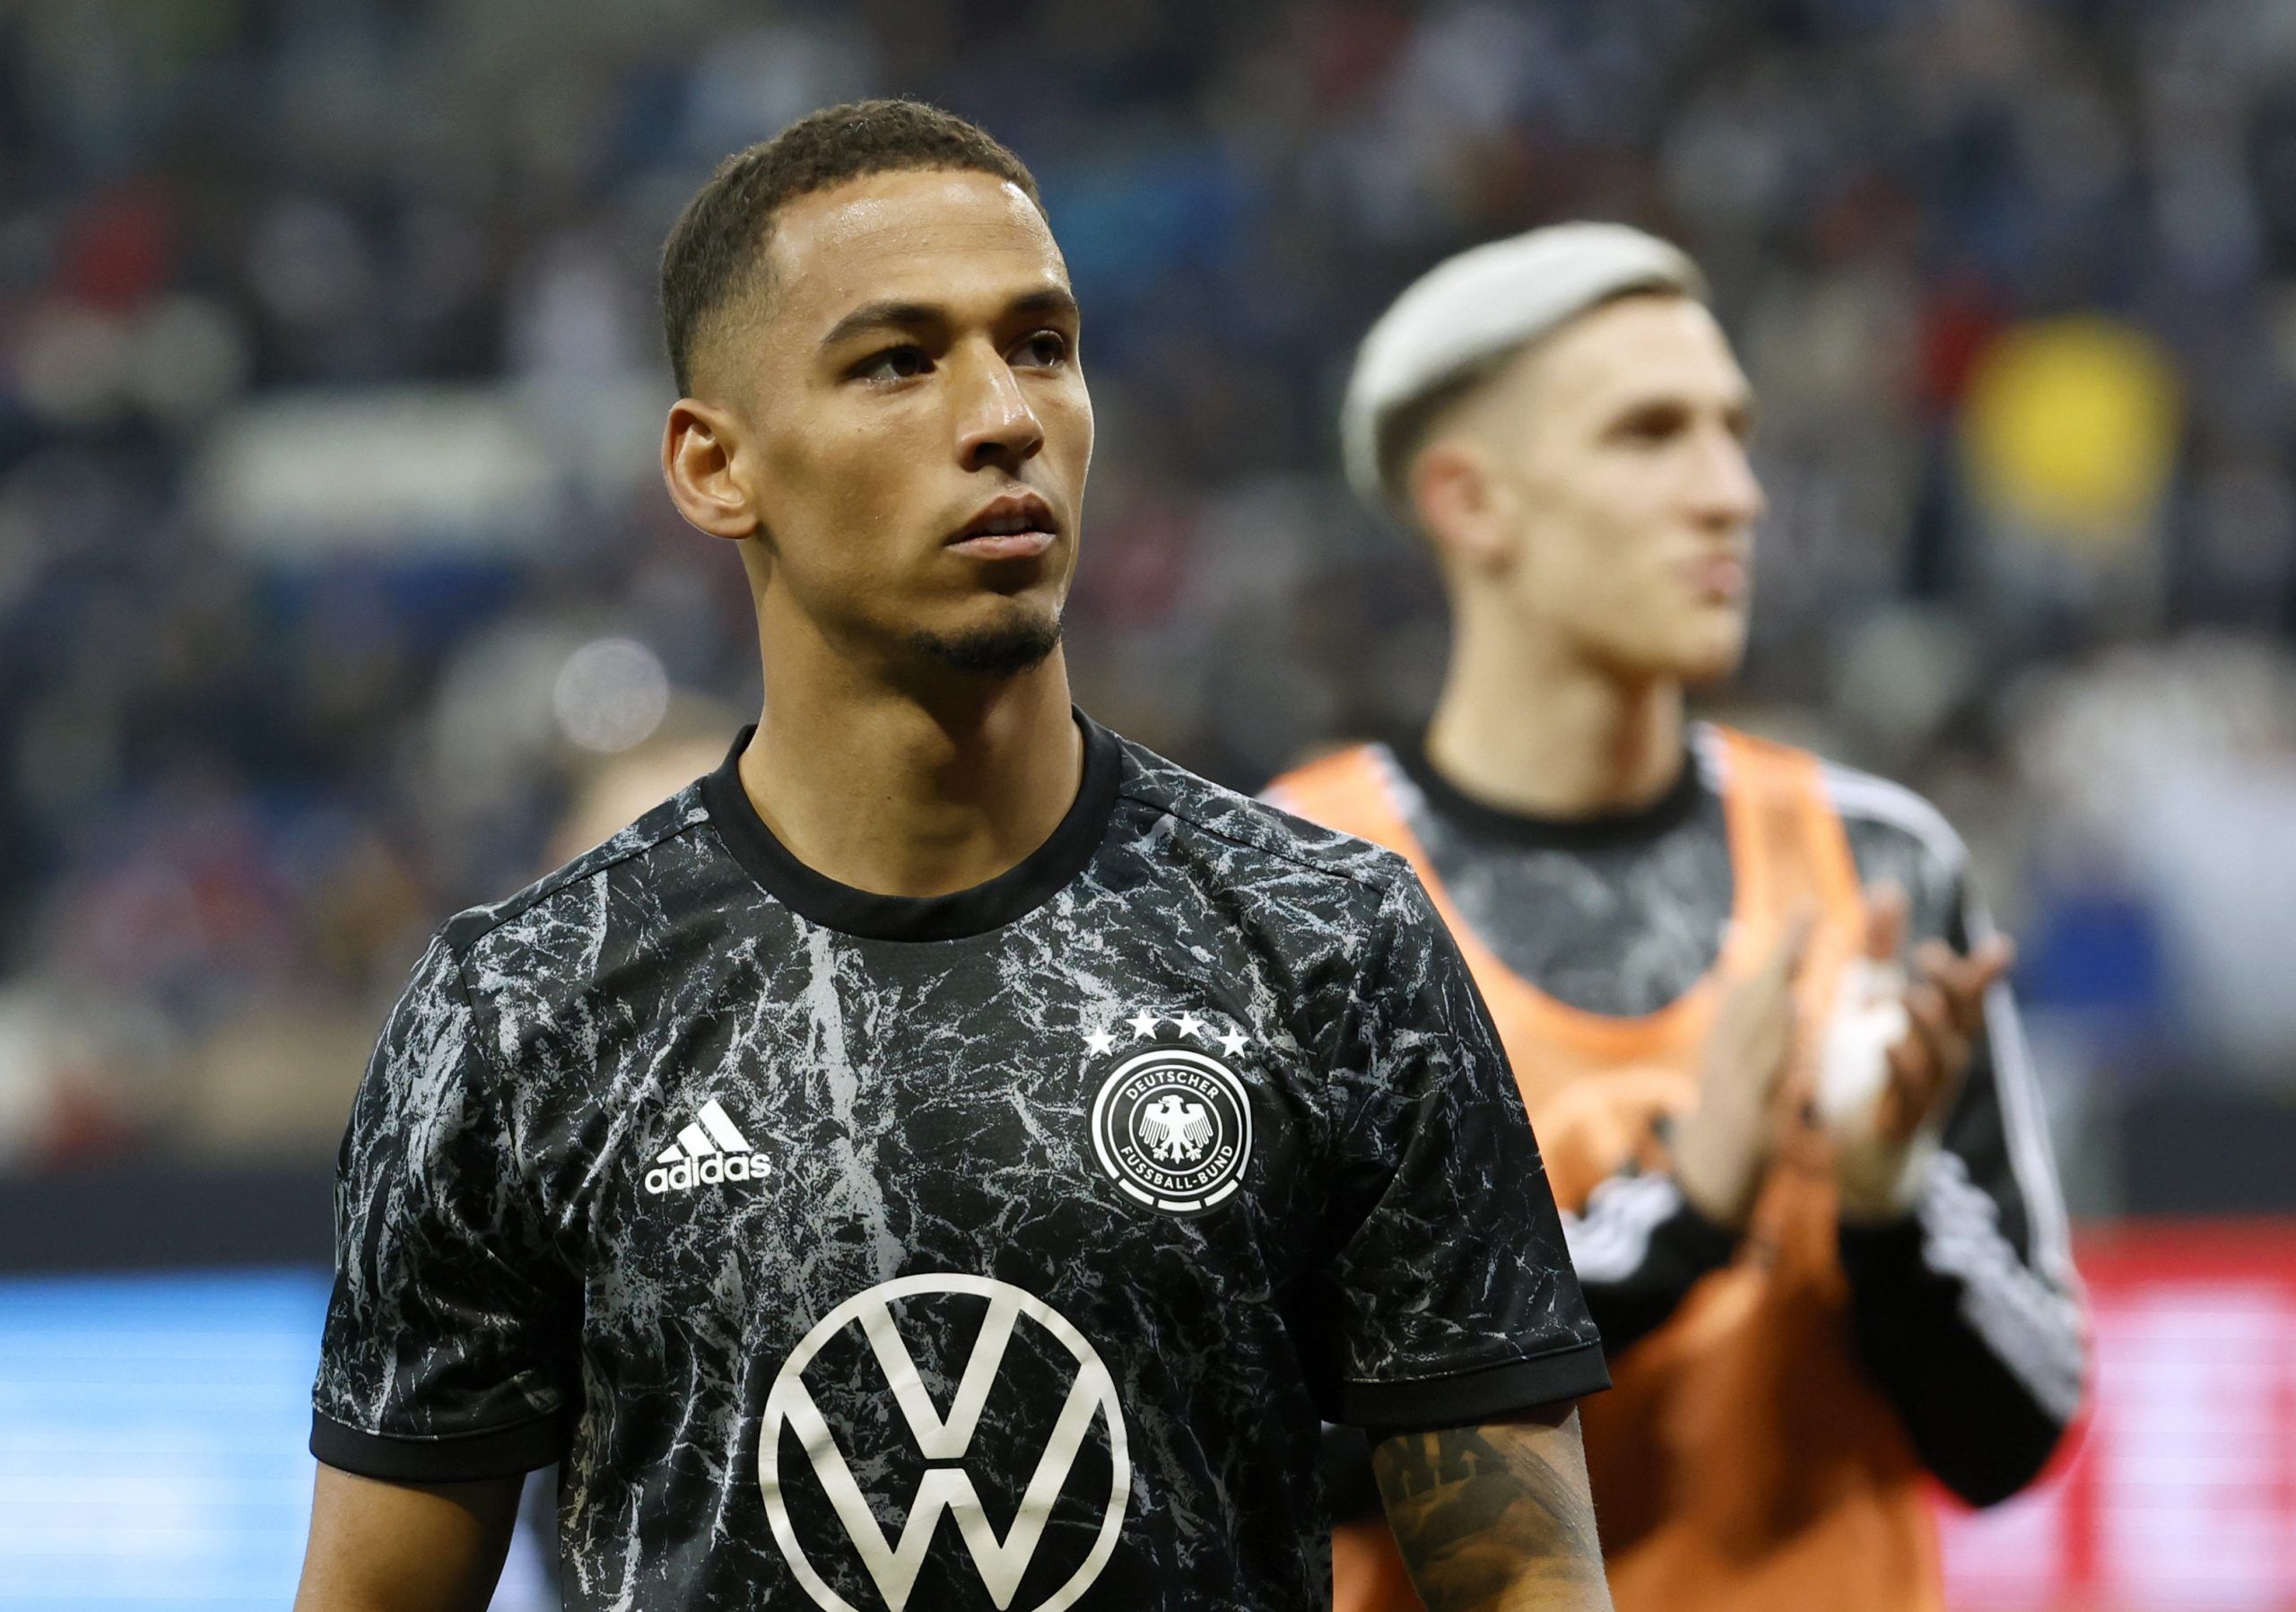 West Ham: Sky Sports reporter says Kehrer is open to Irons move -West Ham Transfer Rumours